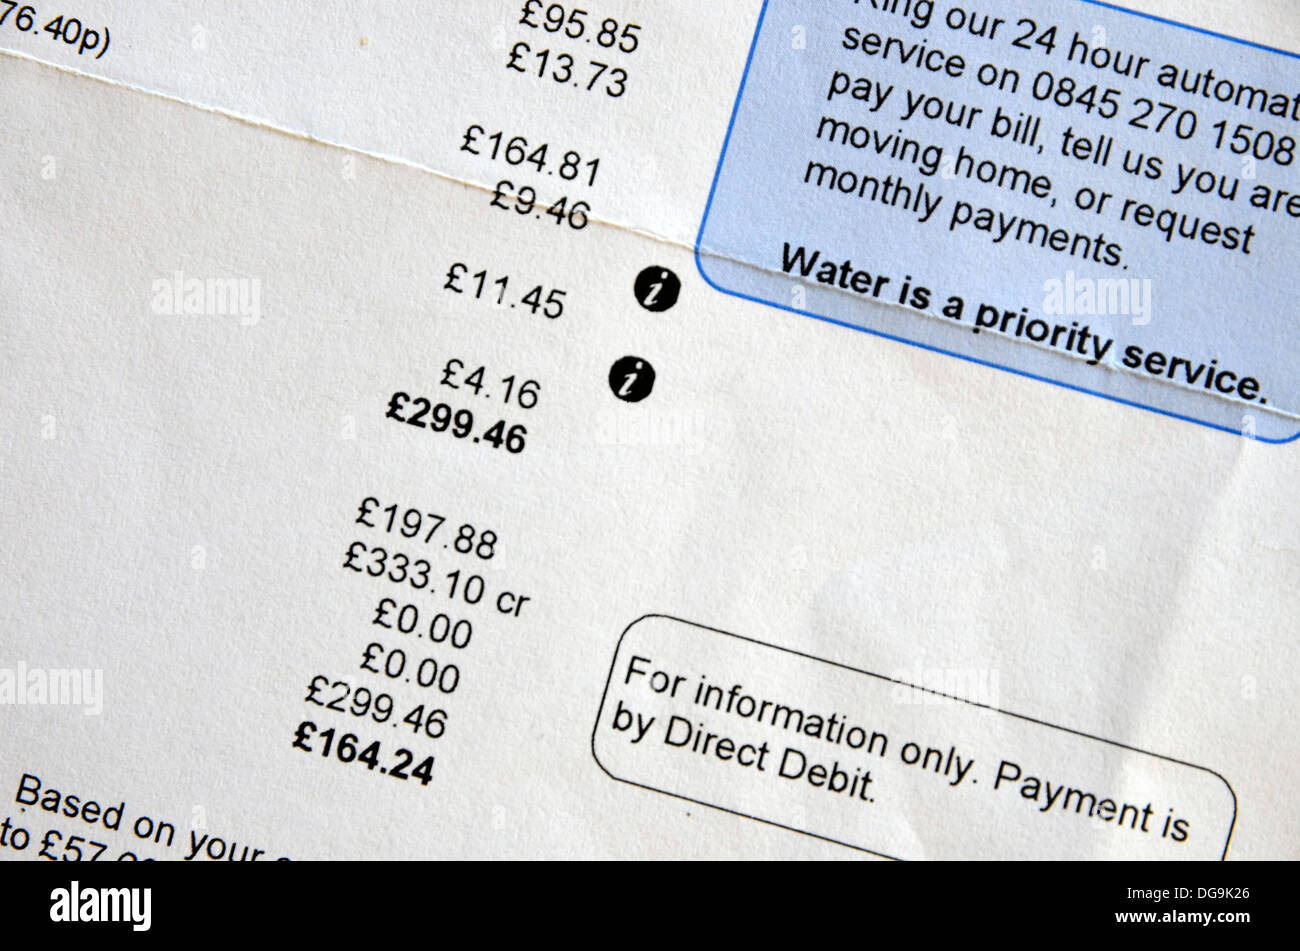 A typical bill from a UK water company. Stock Photo